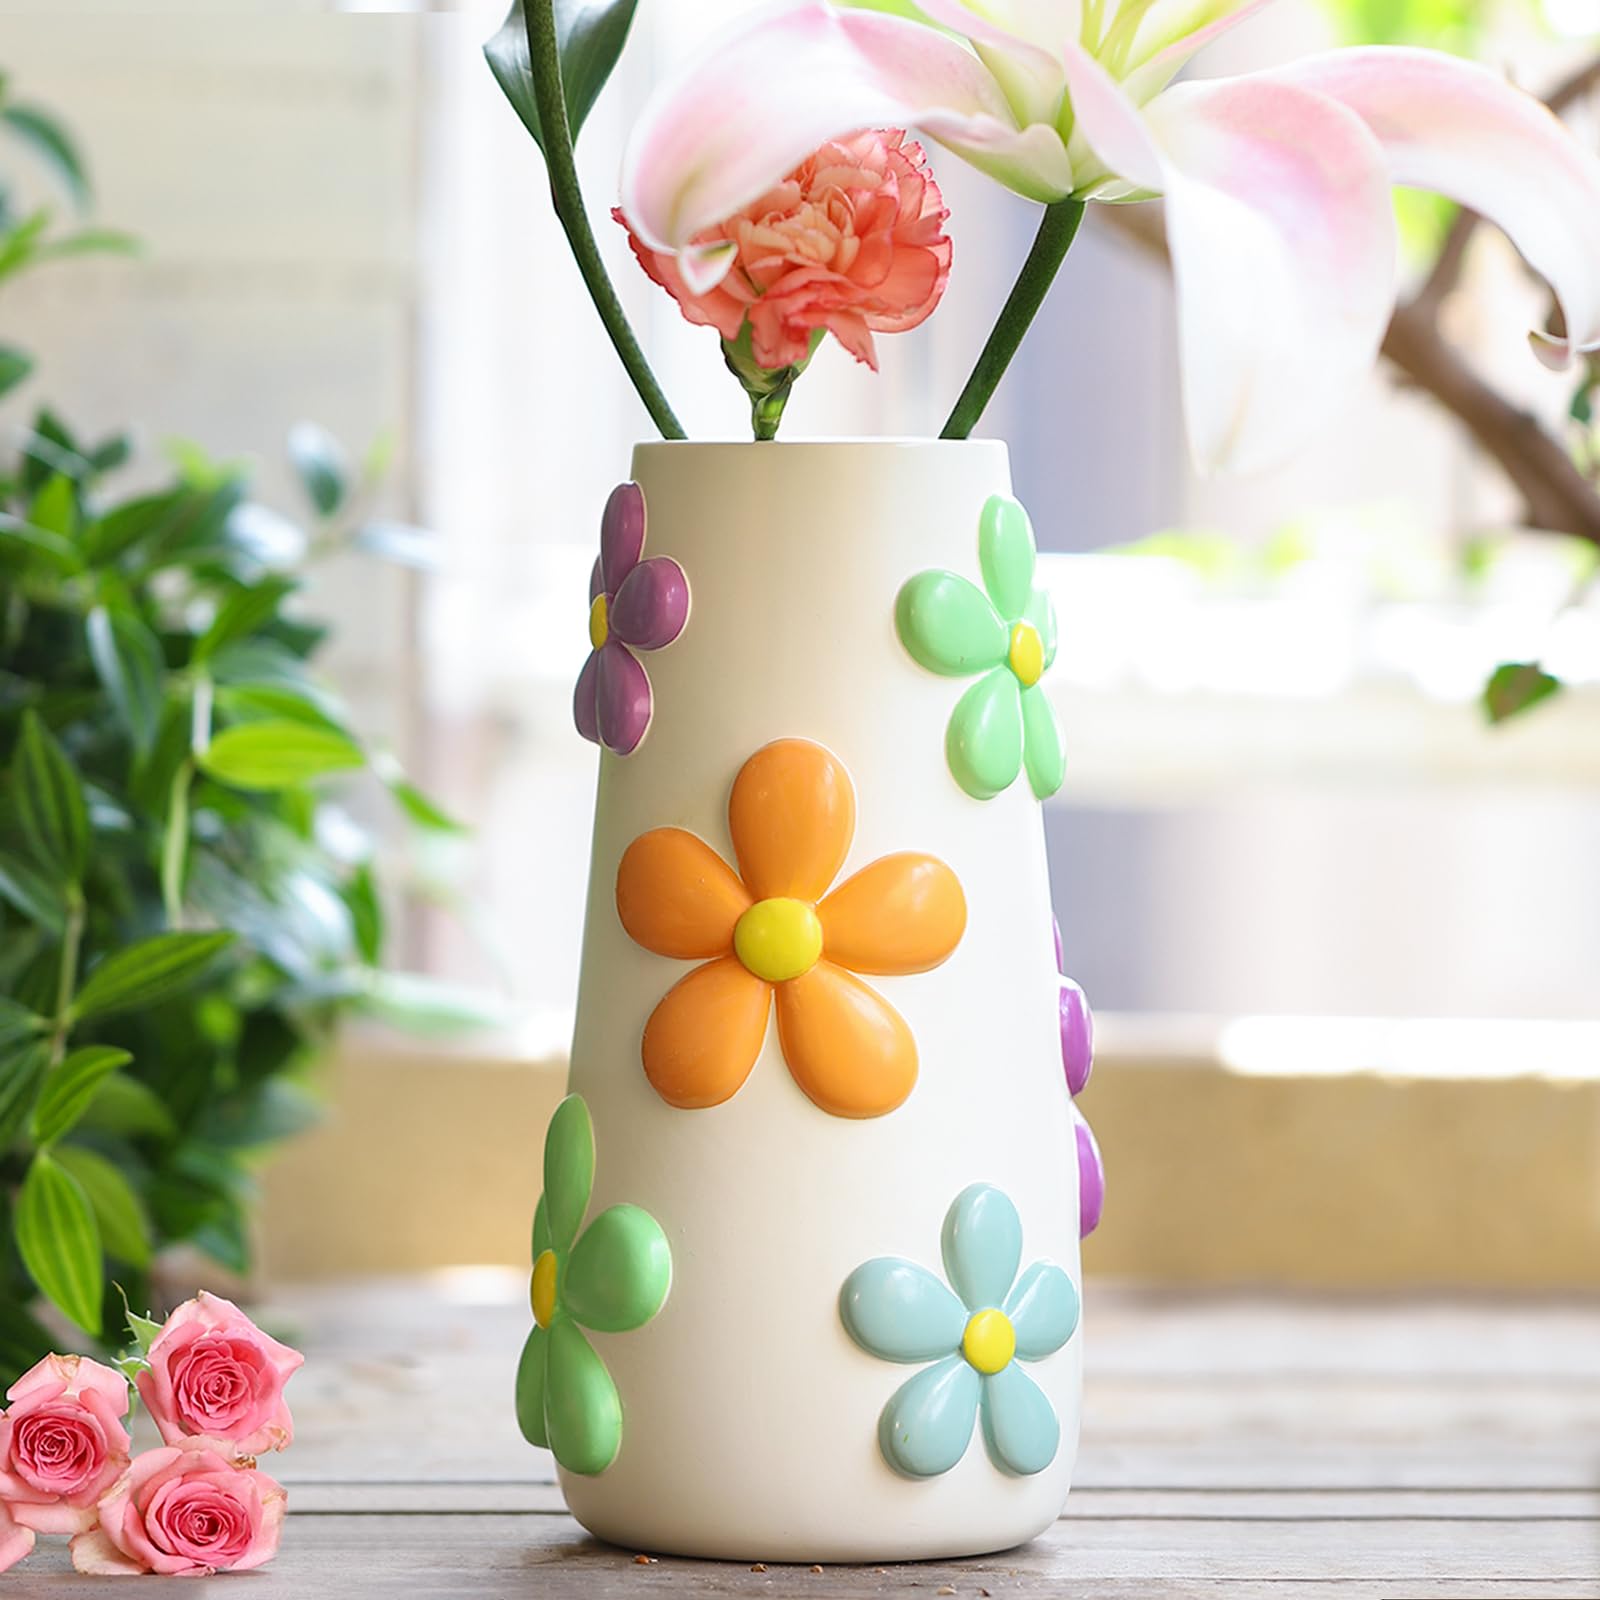 How To Paint A Vase Of Flowers